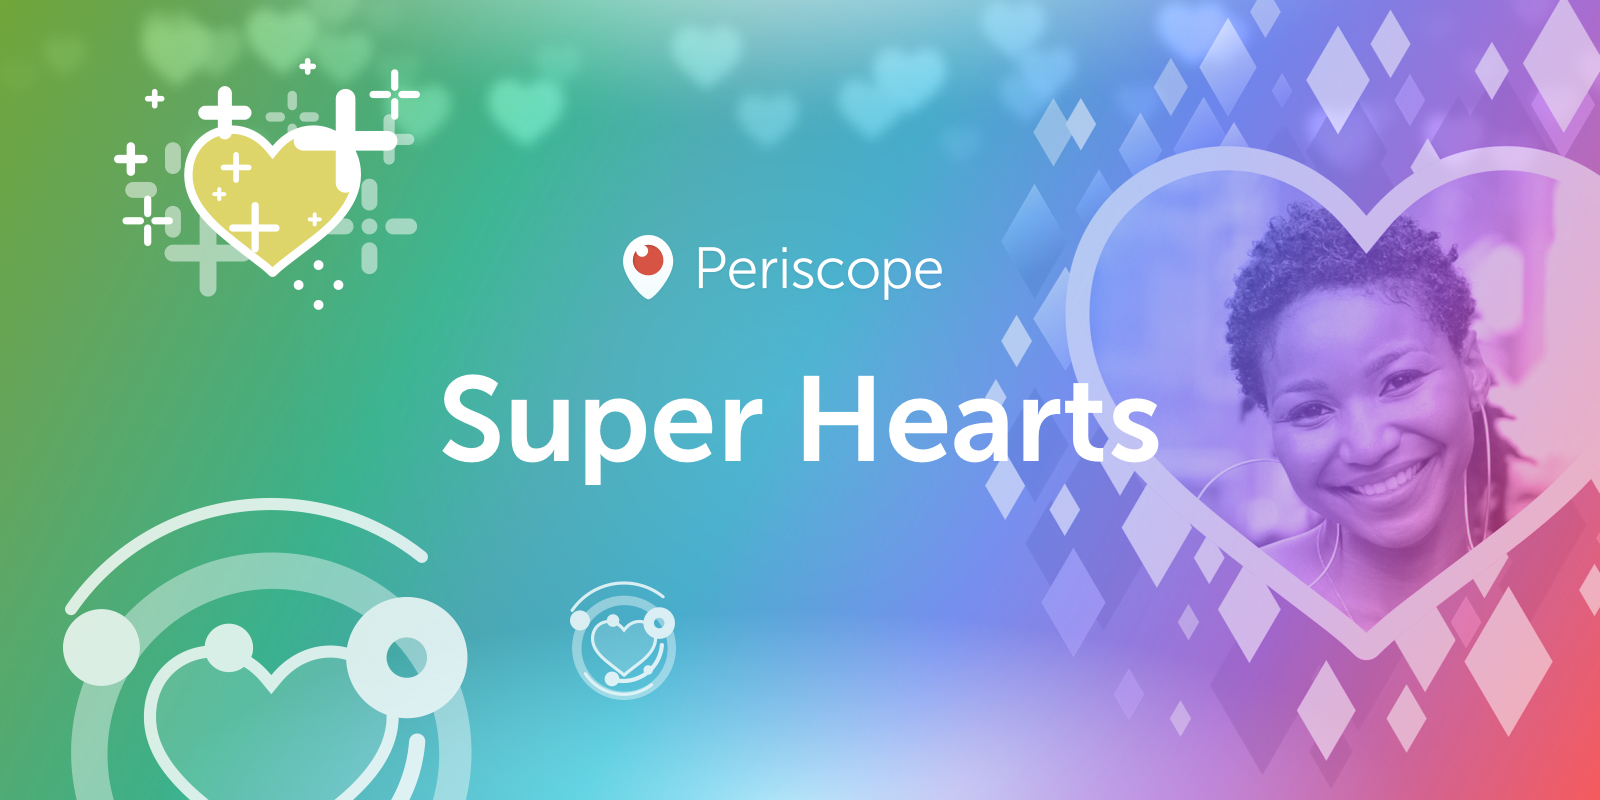 Twitter rolls out Super Hearts, its first paid virtual gift product, for Periscope